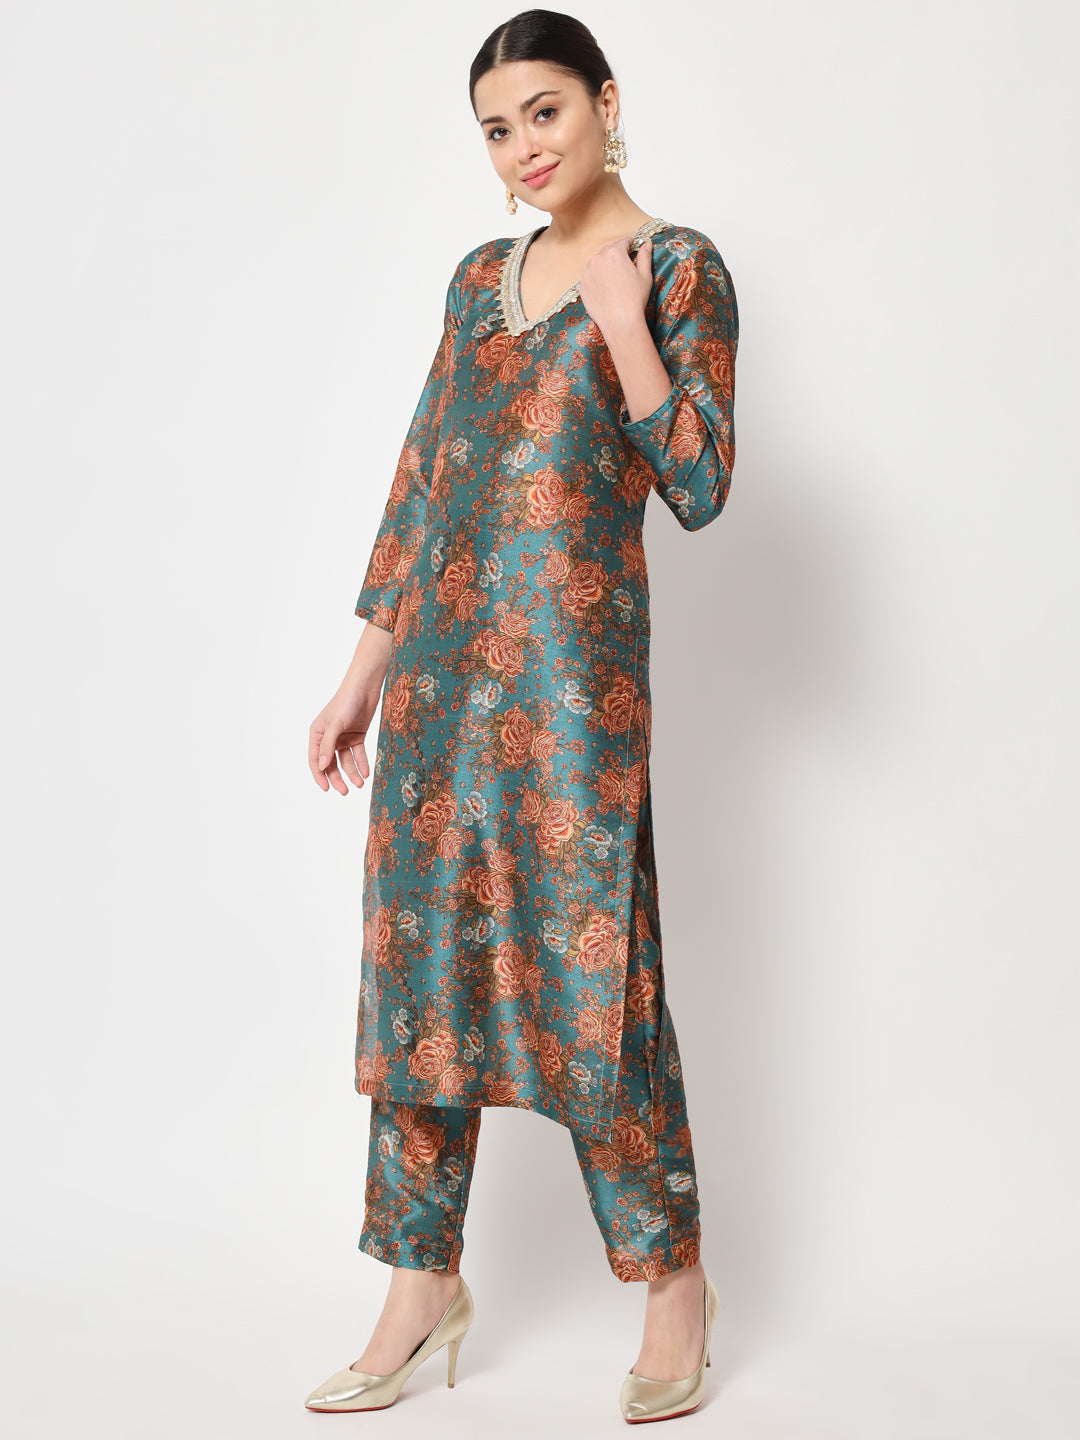 Floral Printed Rayon Cotton Kurti Knee Length With Center Pleat Stylis –  Anushil